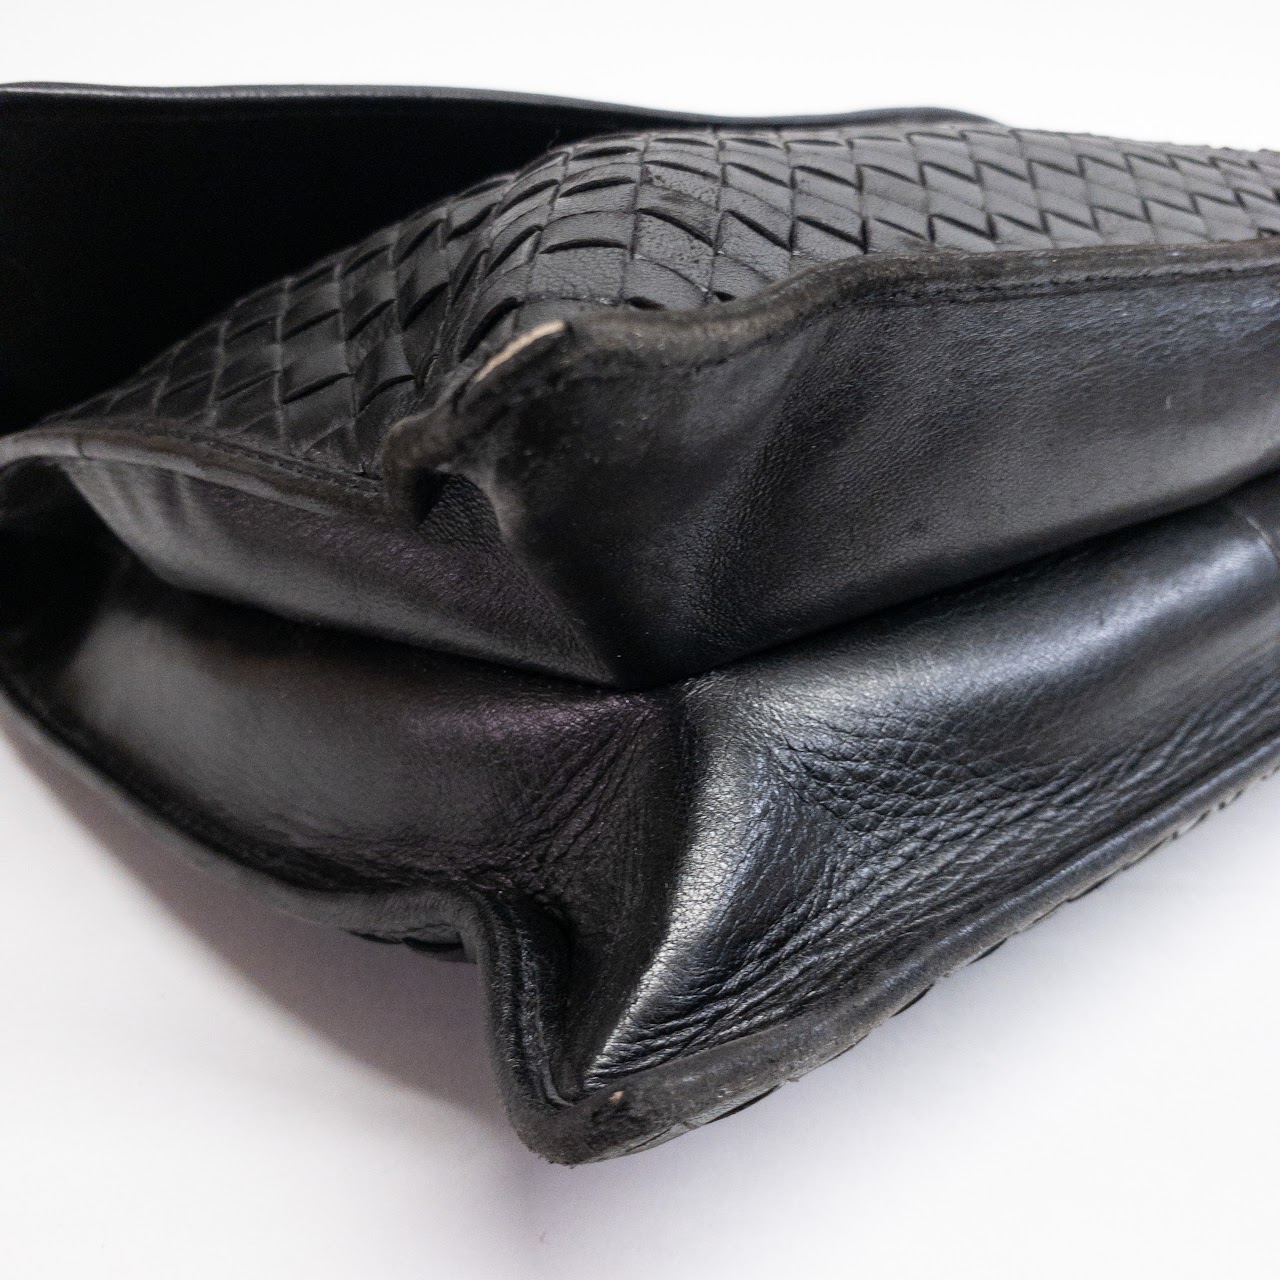 Sold at Auction: Bottega Veneta Point Leather-Trimmed Jacquard Pouch